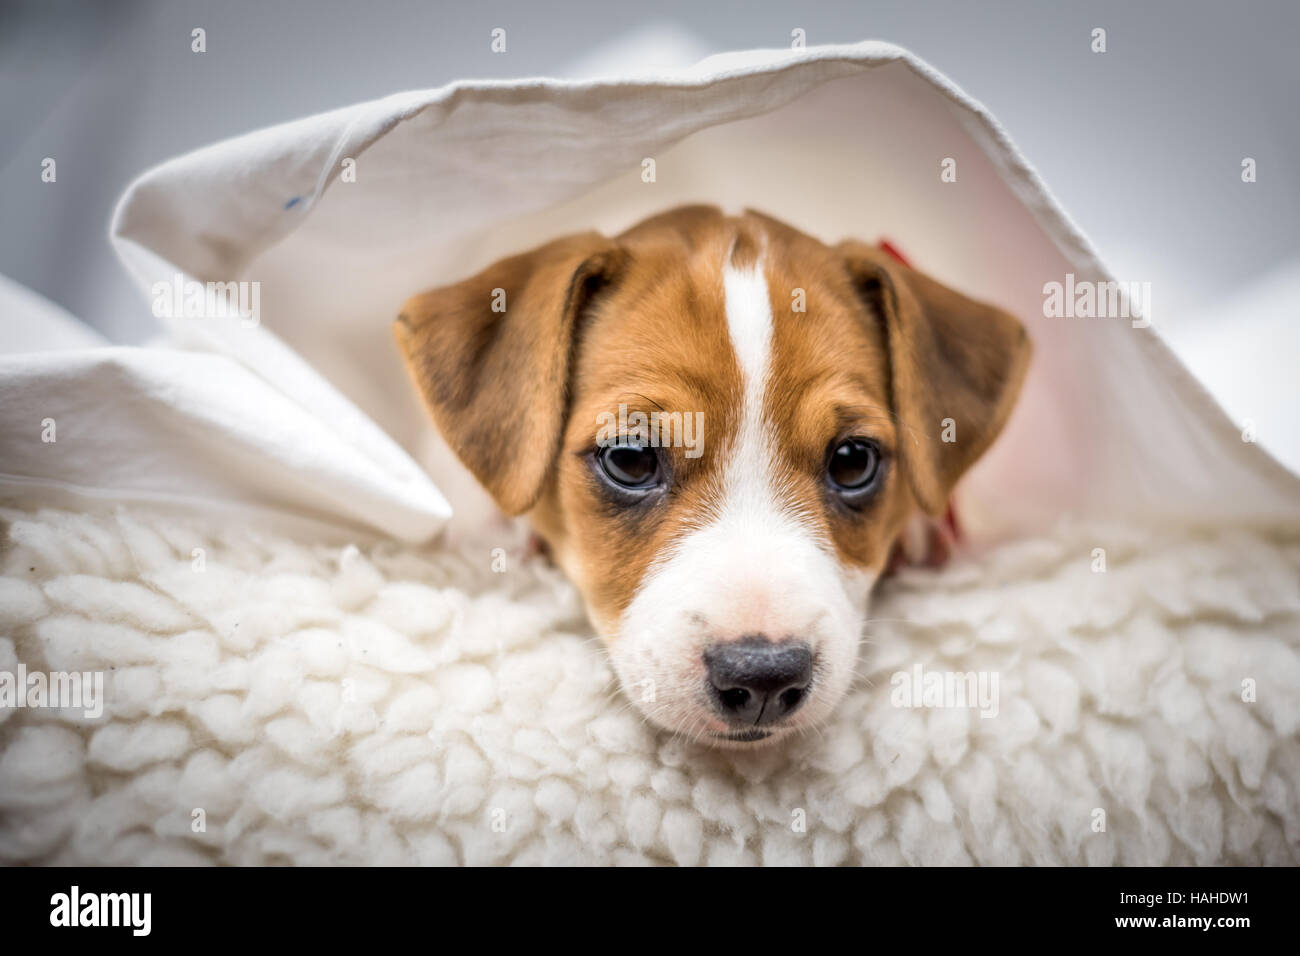 Page 7 - Friend On The Carpet High Resolution Stock Photography and Images  - Alamy